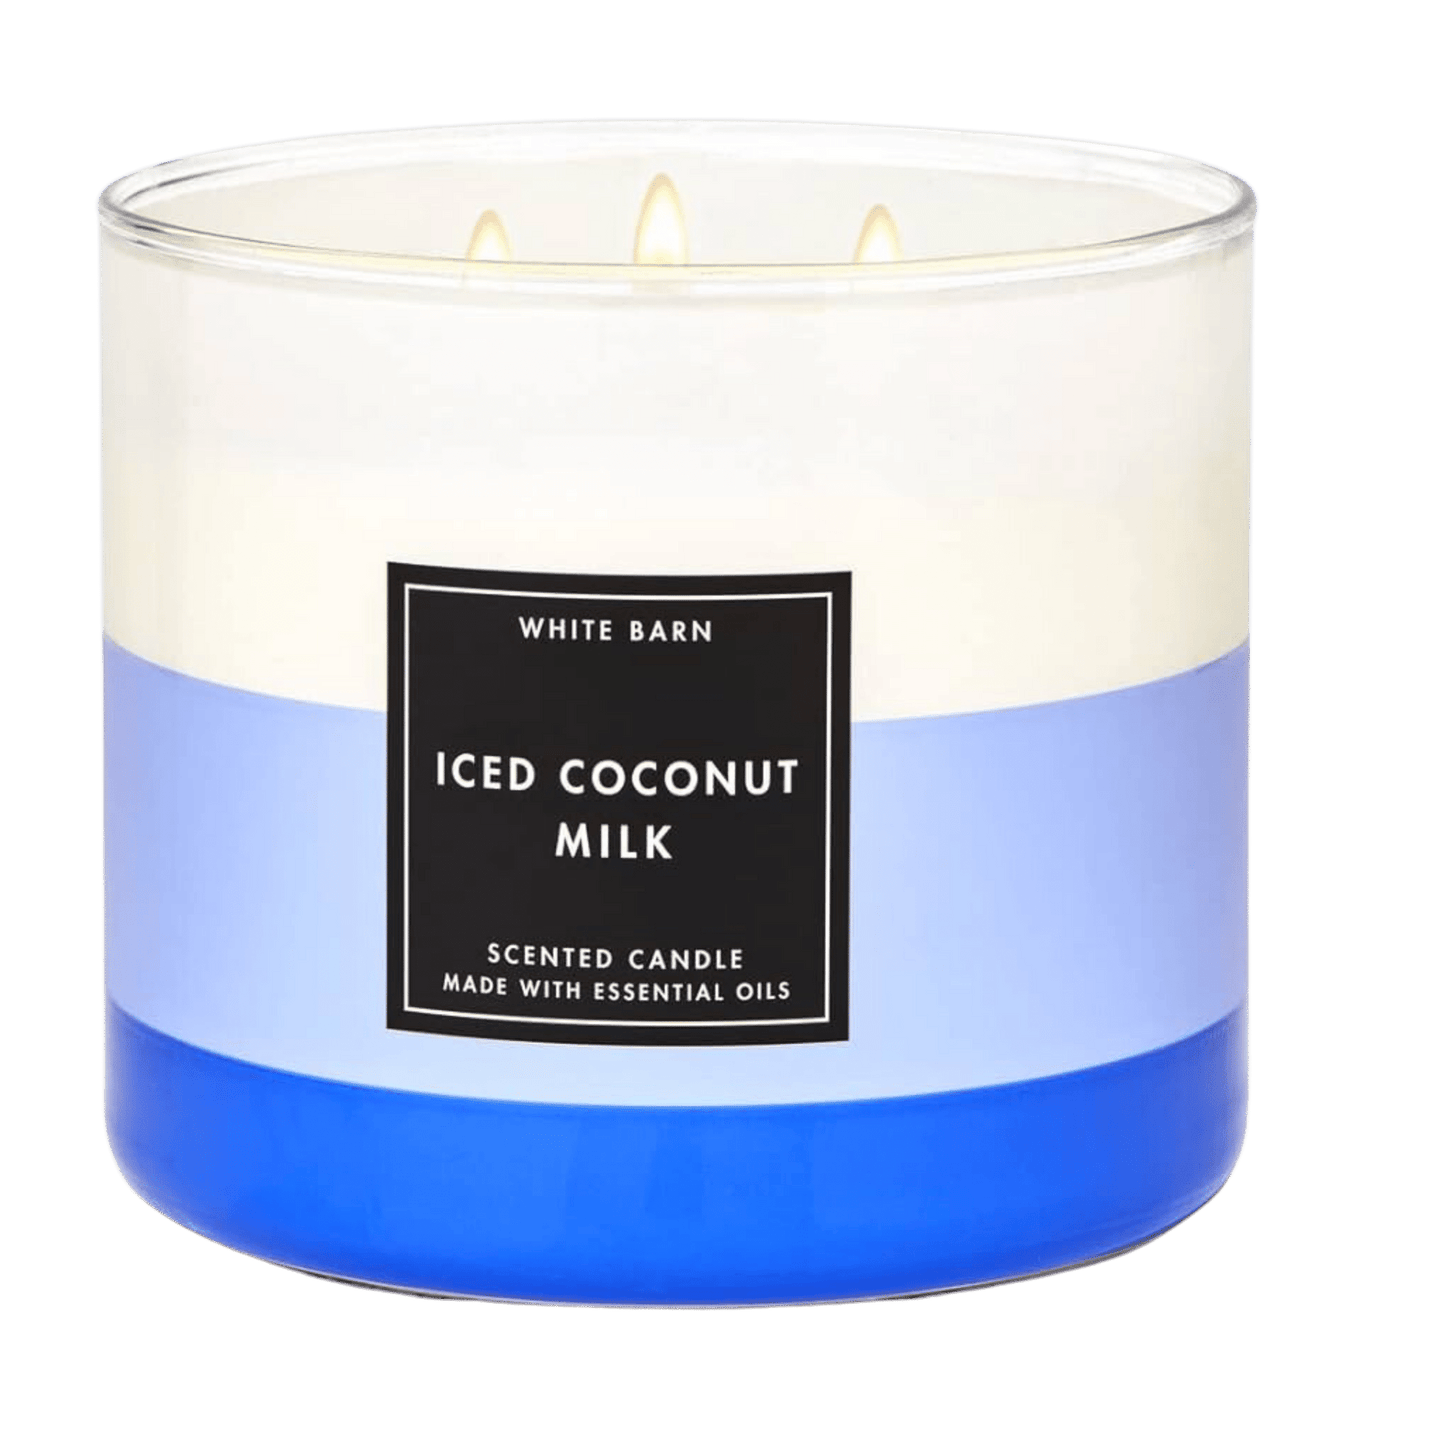 Iced Coconut Milk 3 Wick Candle for sale in Pakistan